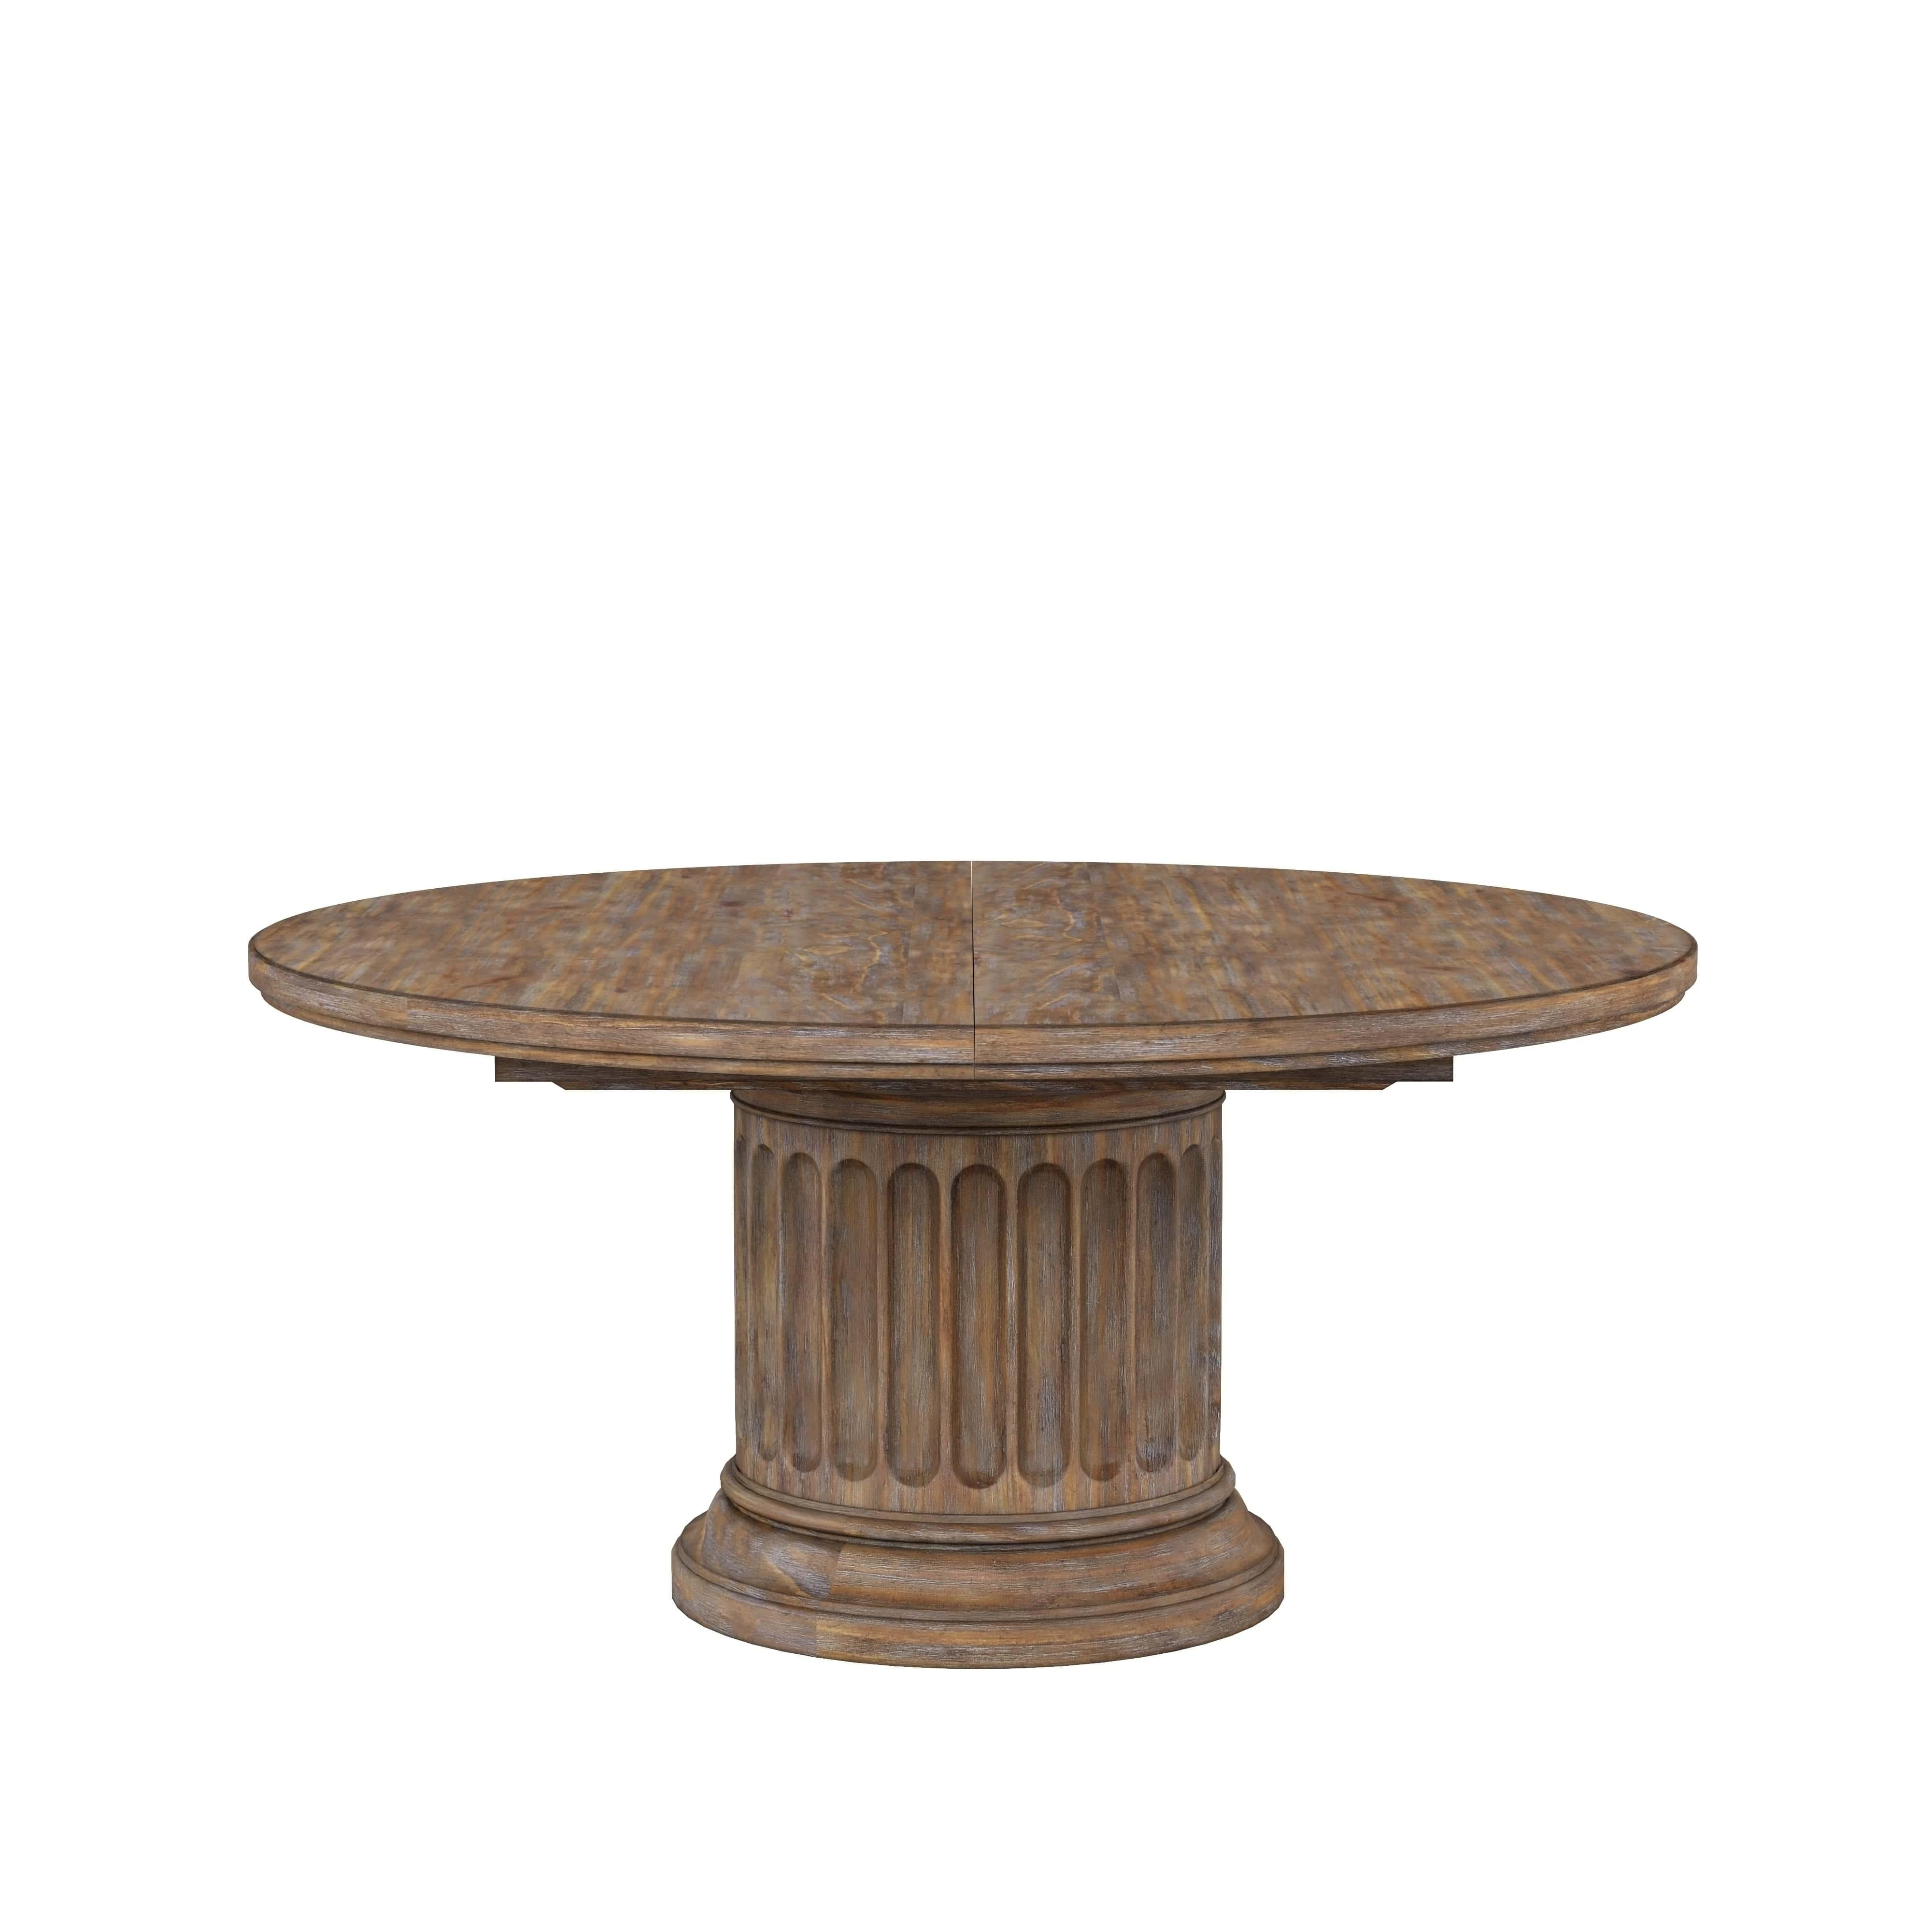 Traditional, Farmhouse Dining Table Architrave 277225-2608 in Brown 